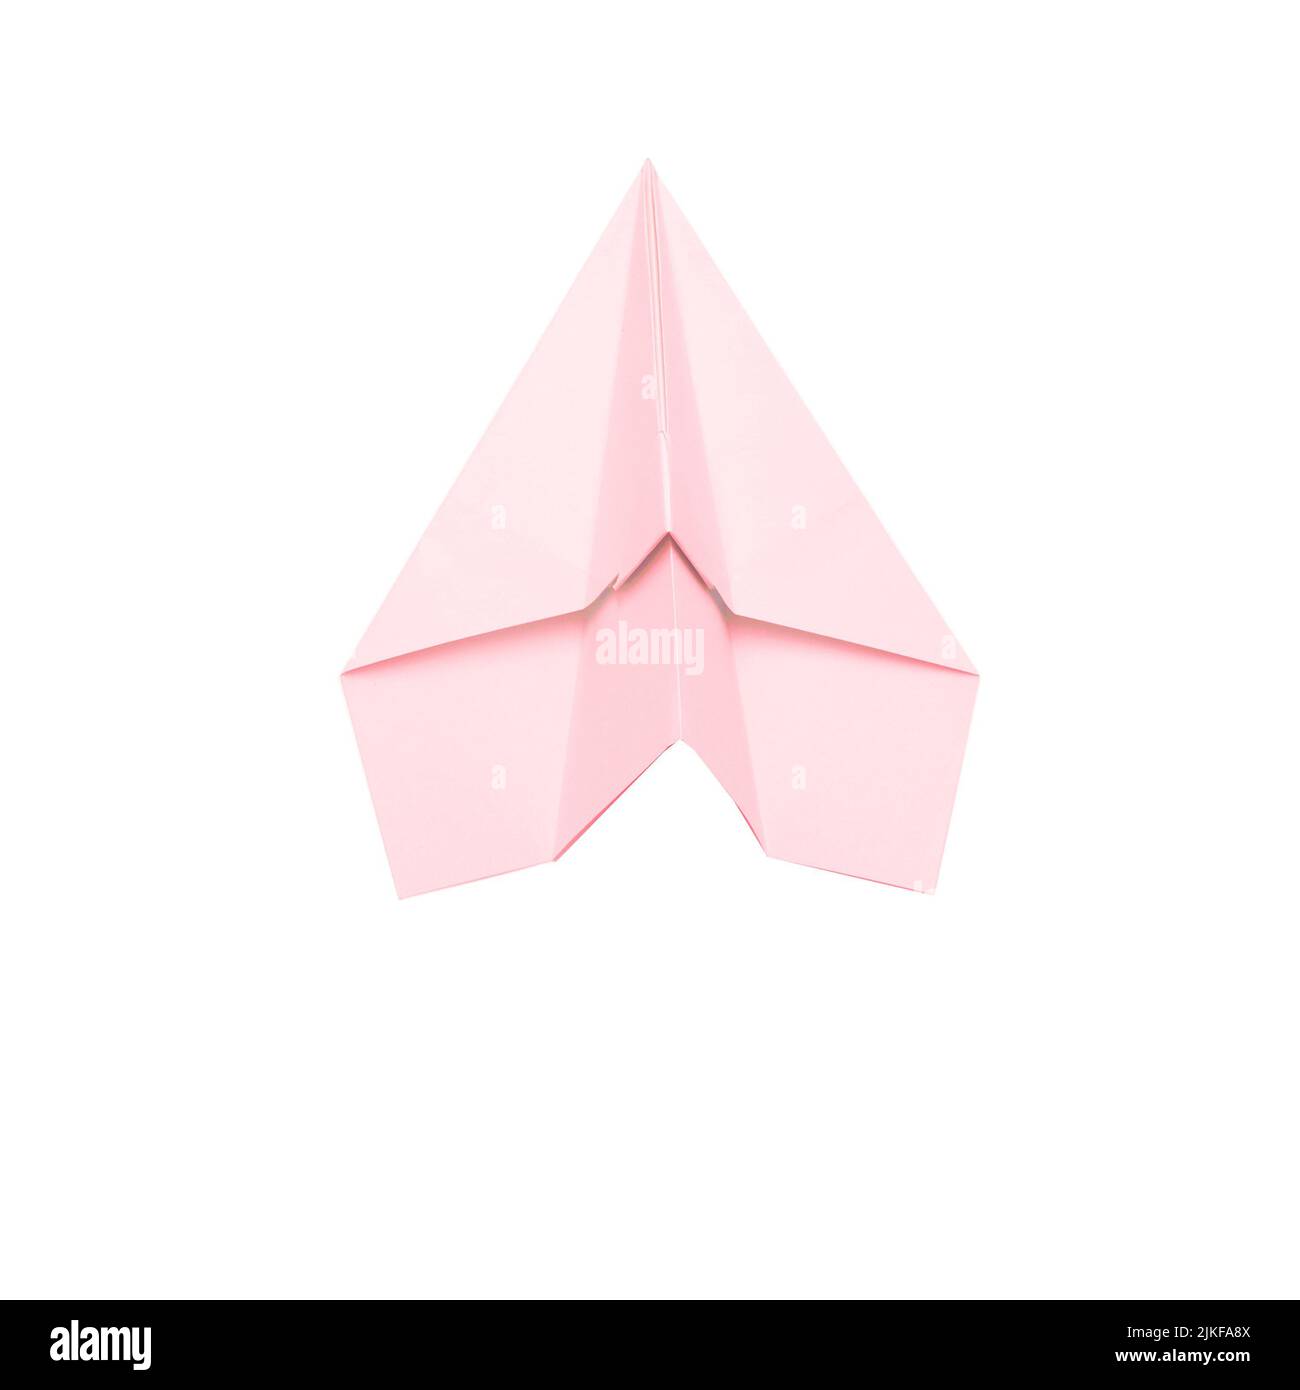 hopes dreams future plans pink paper airplane Stock Photo